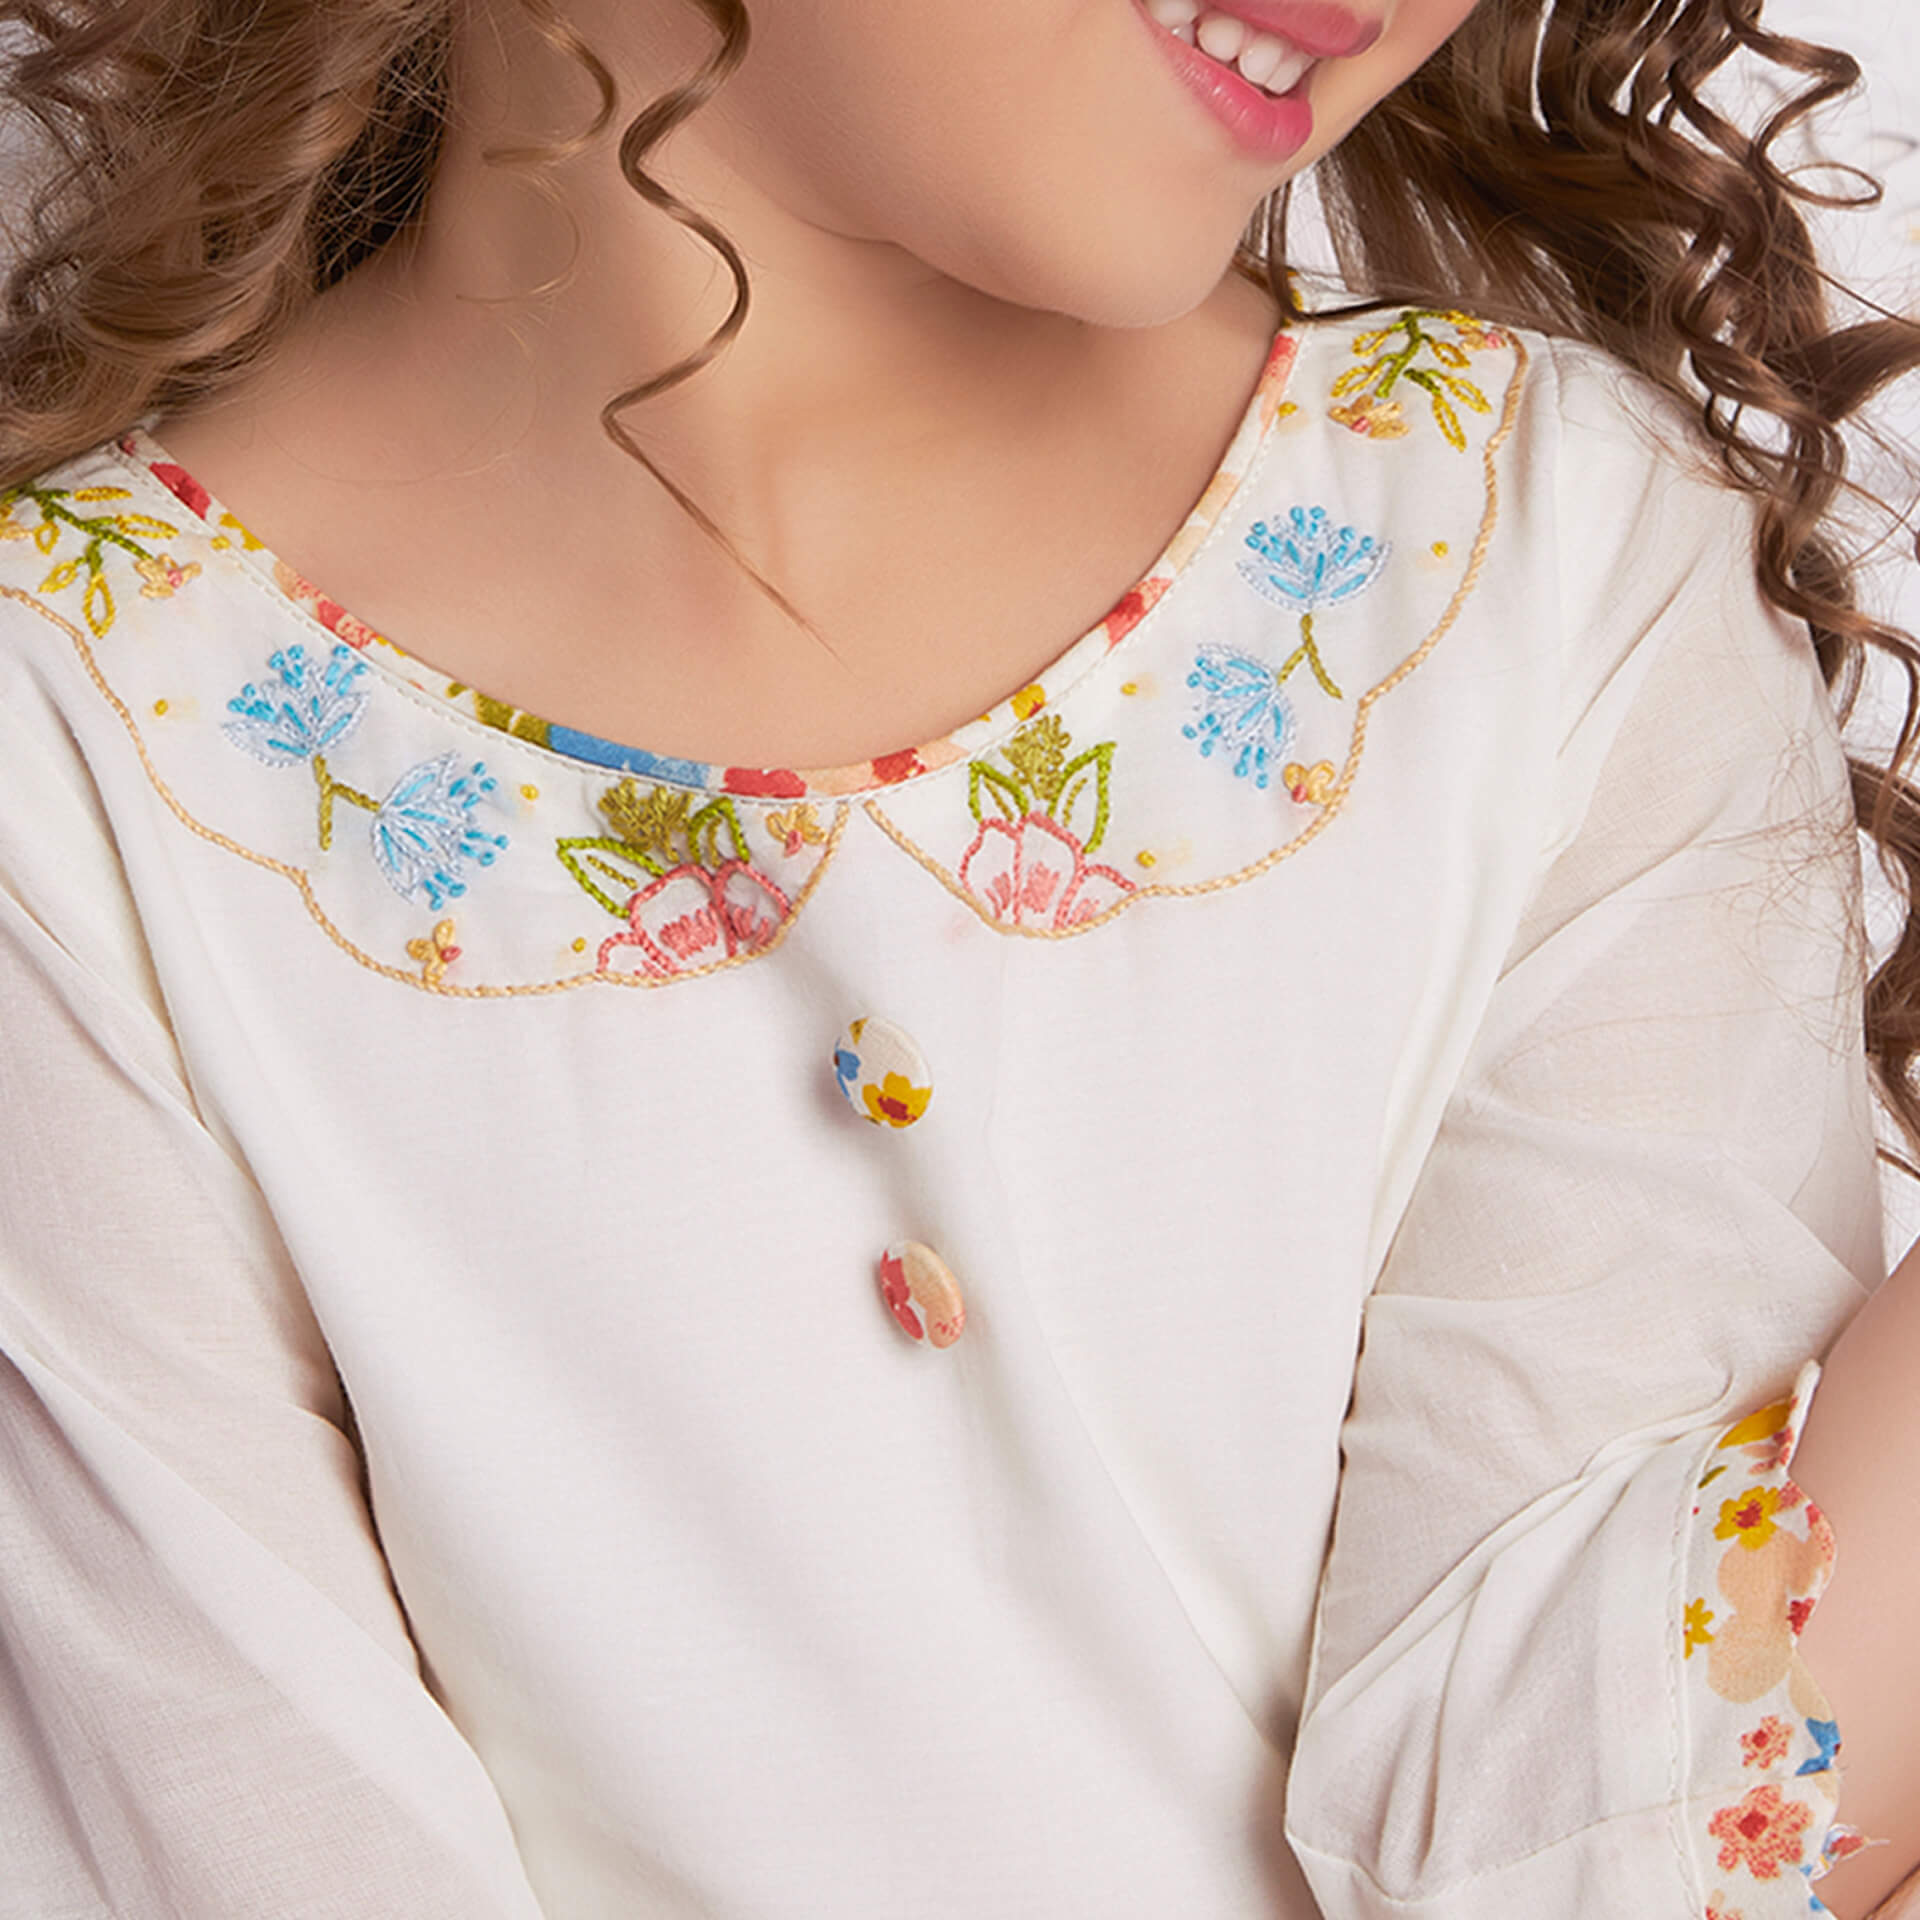 Detailed close-up of the embroidery on the neckline of white dress